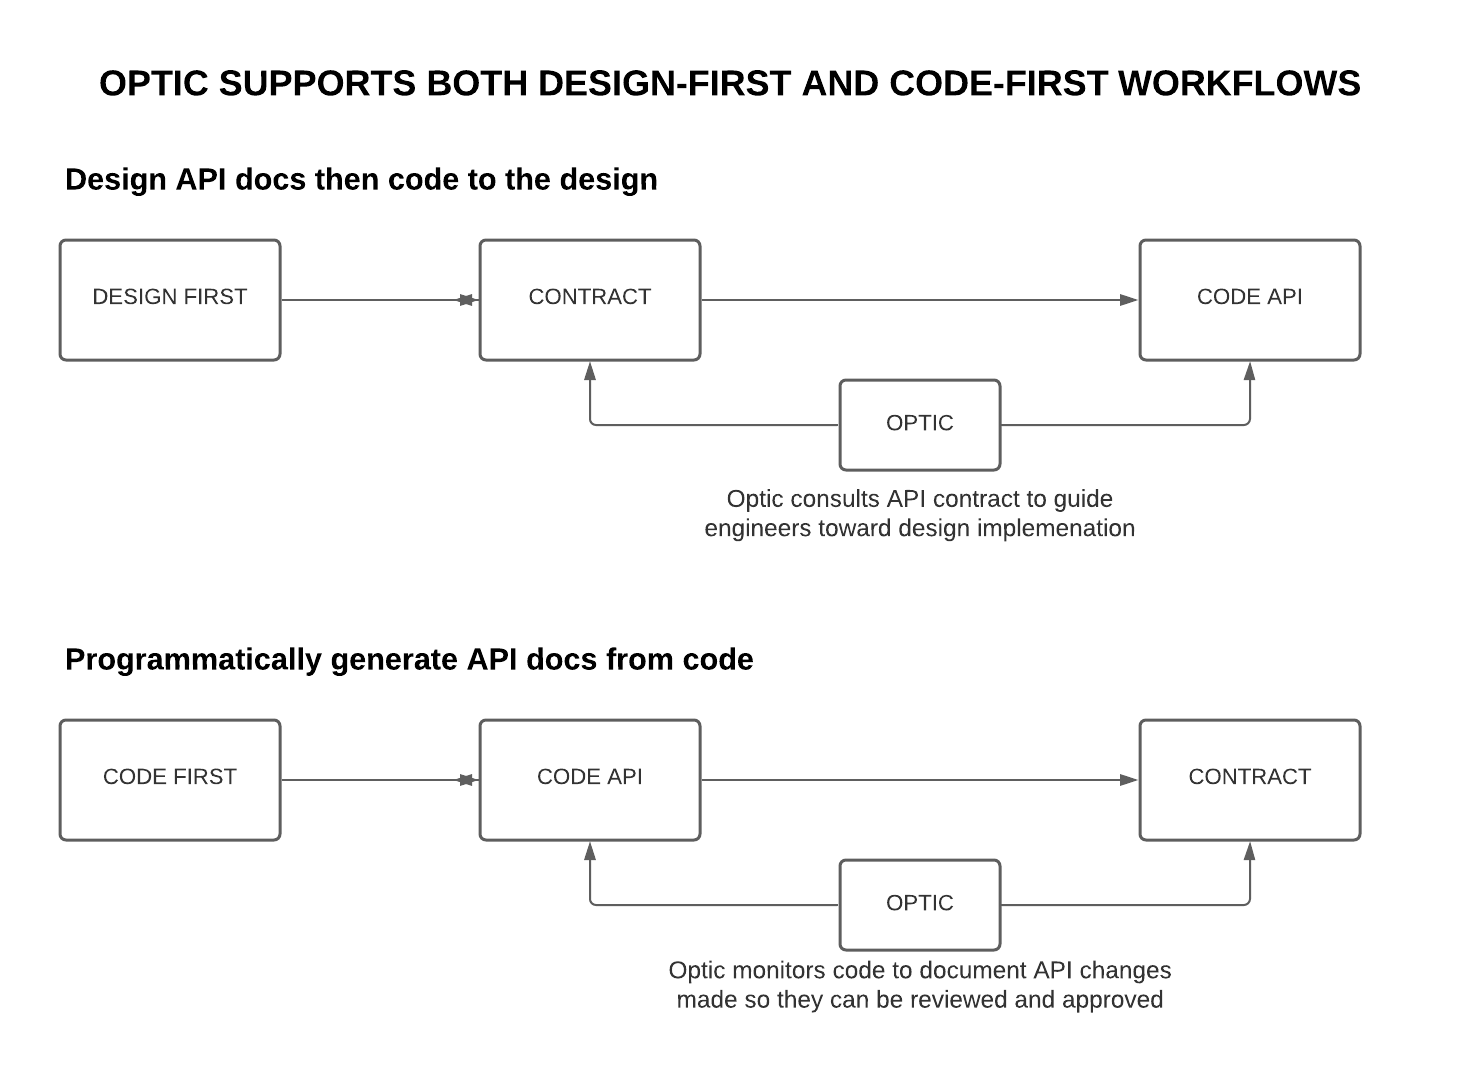 Optic supports design-first and code-first workflows